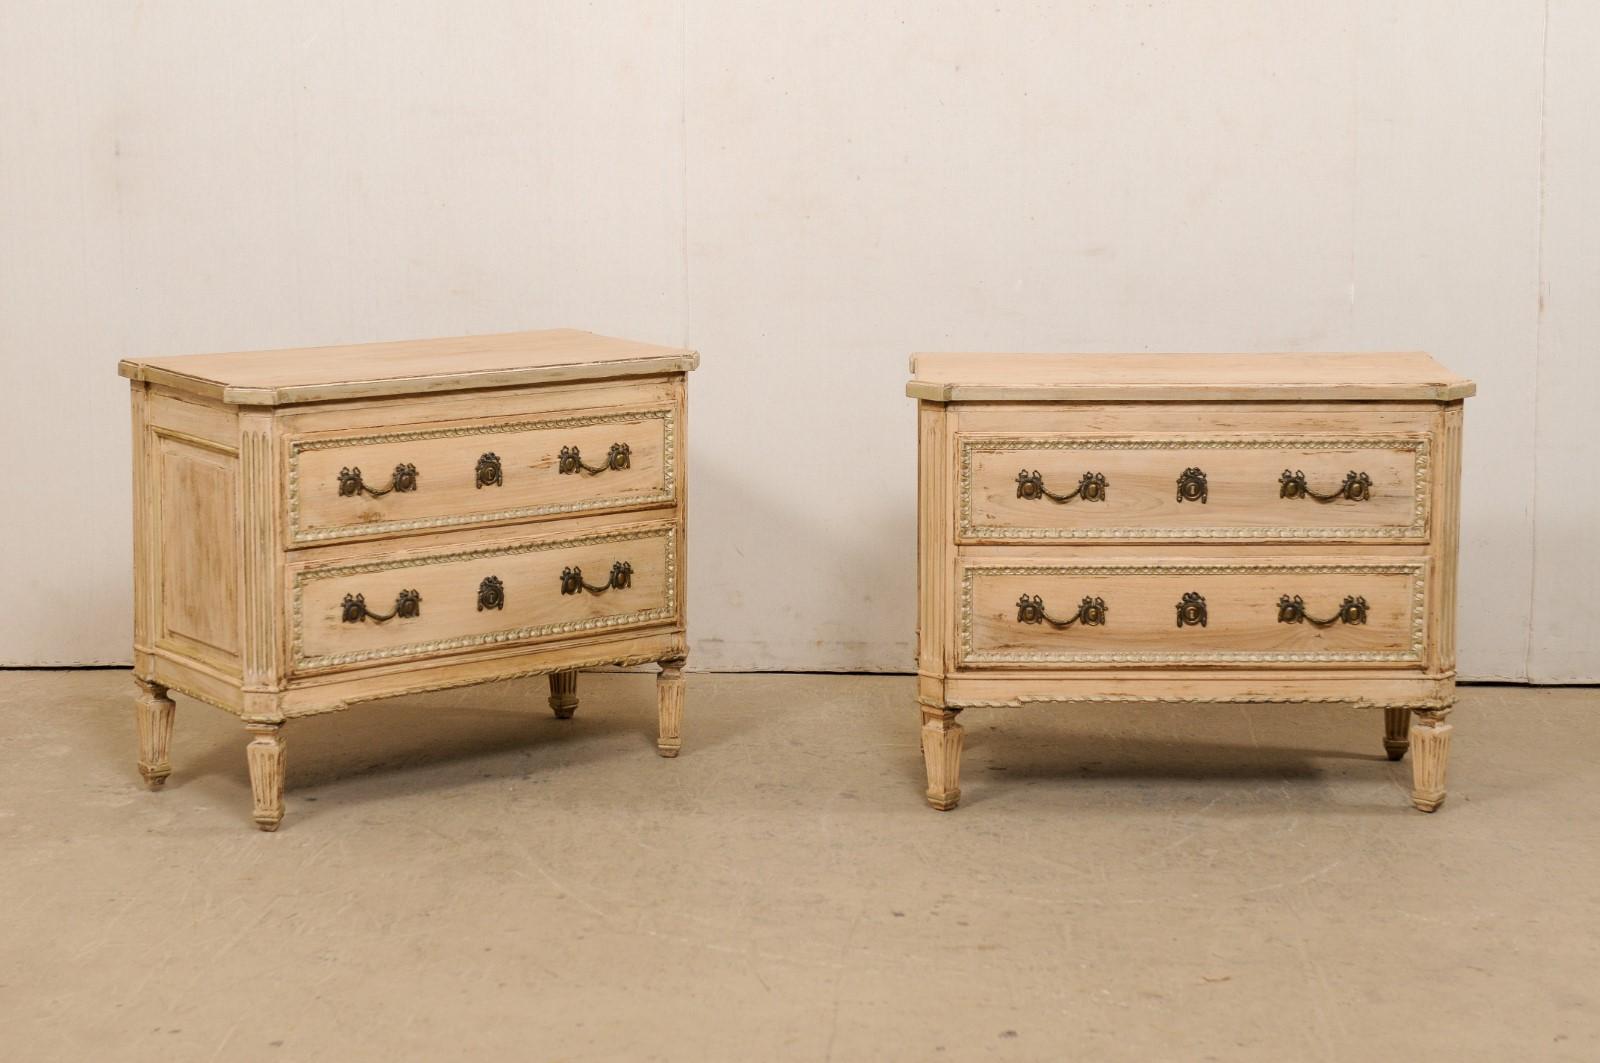 A vintage pair of nicely inspired French neoclassical style raised chests, American made by furniture makers Auffray & Co (NYC). This pair of French style commodes each feature rectangular-shaped tops with profiled corners, atop a case which houses